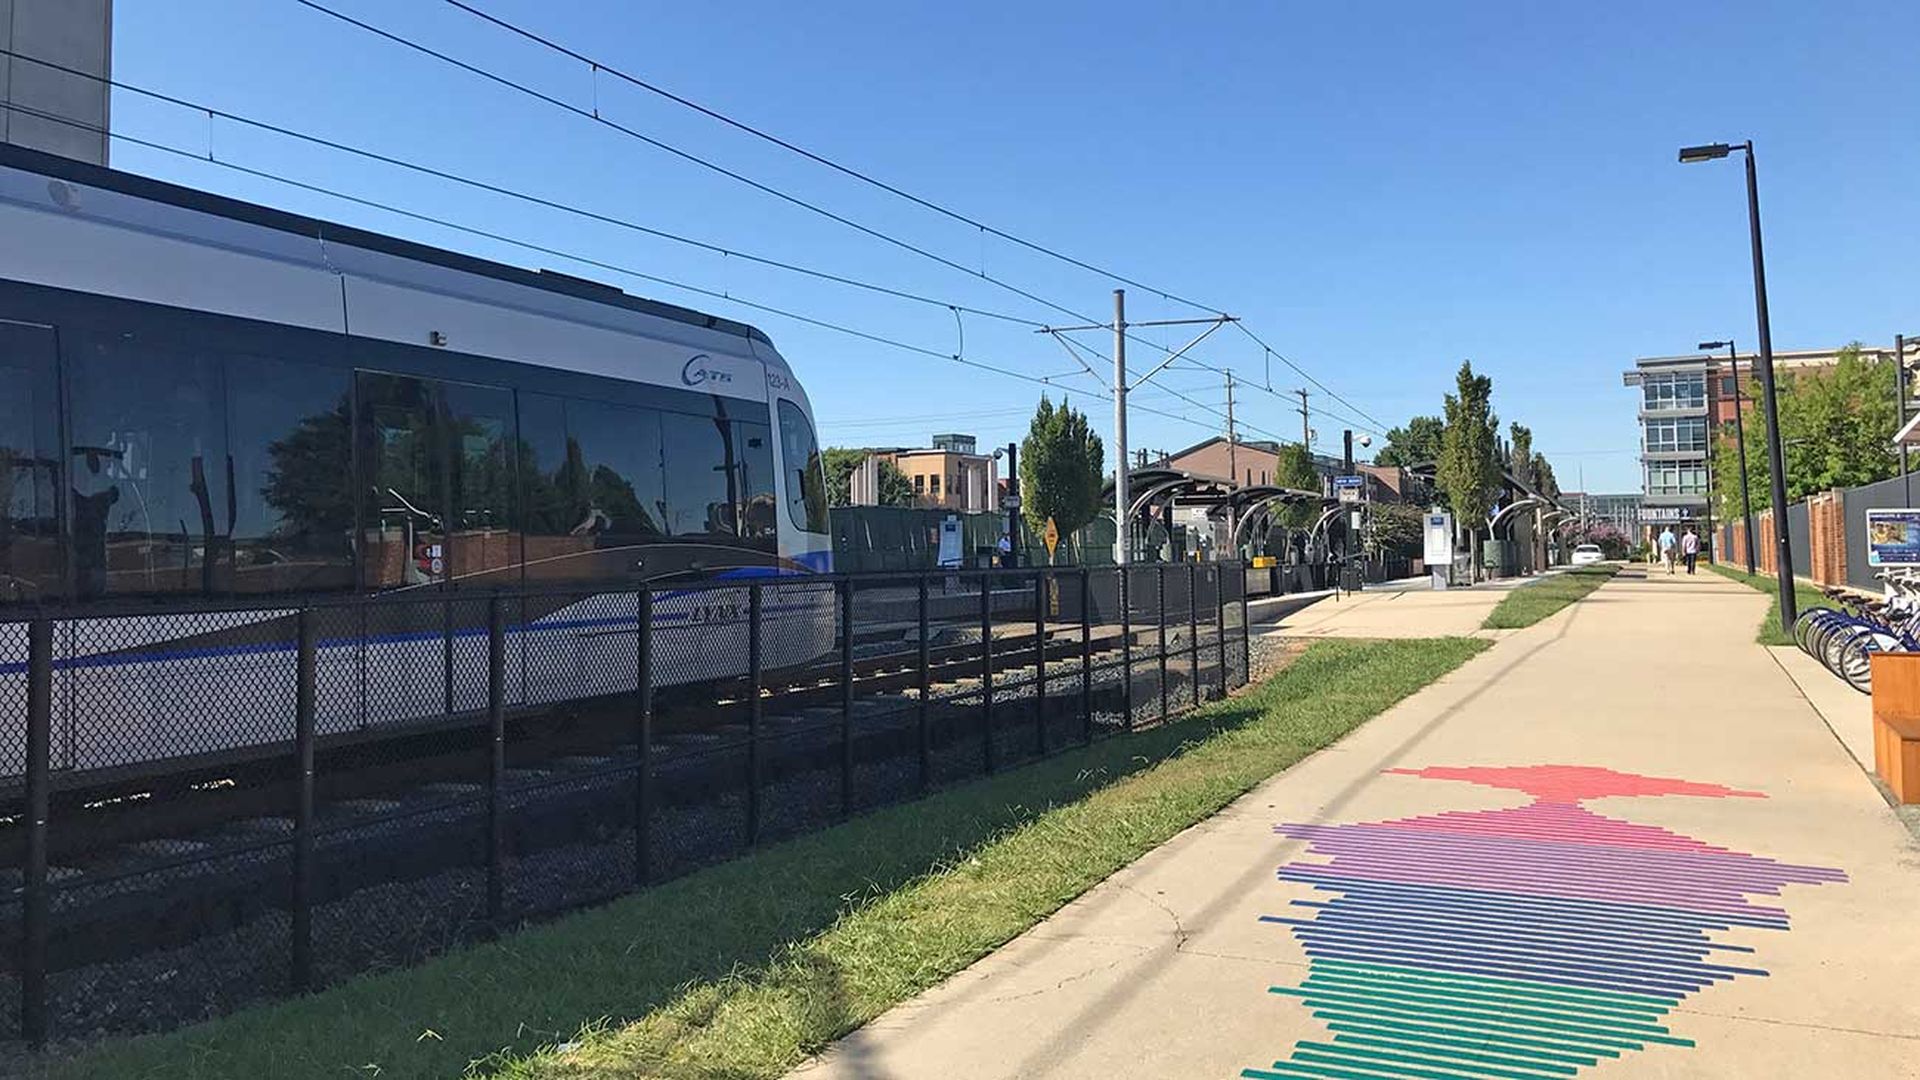 Mobile ticketing for the light rail is finally here - Axios Charlotte